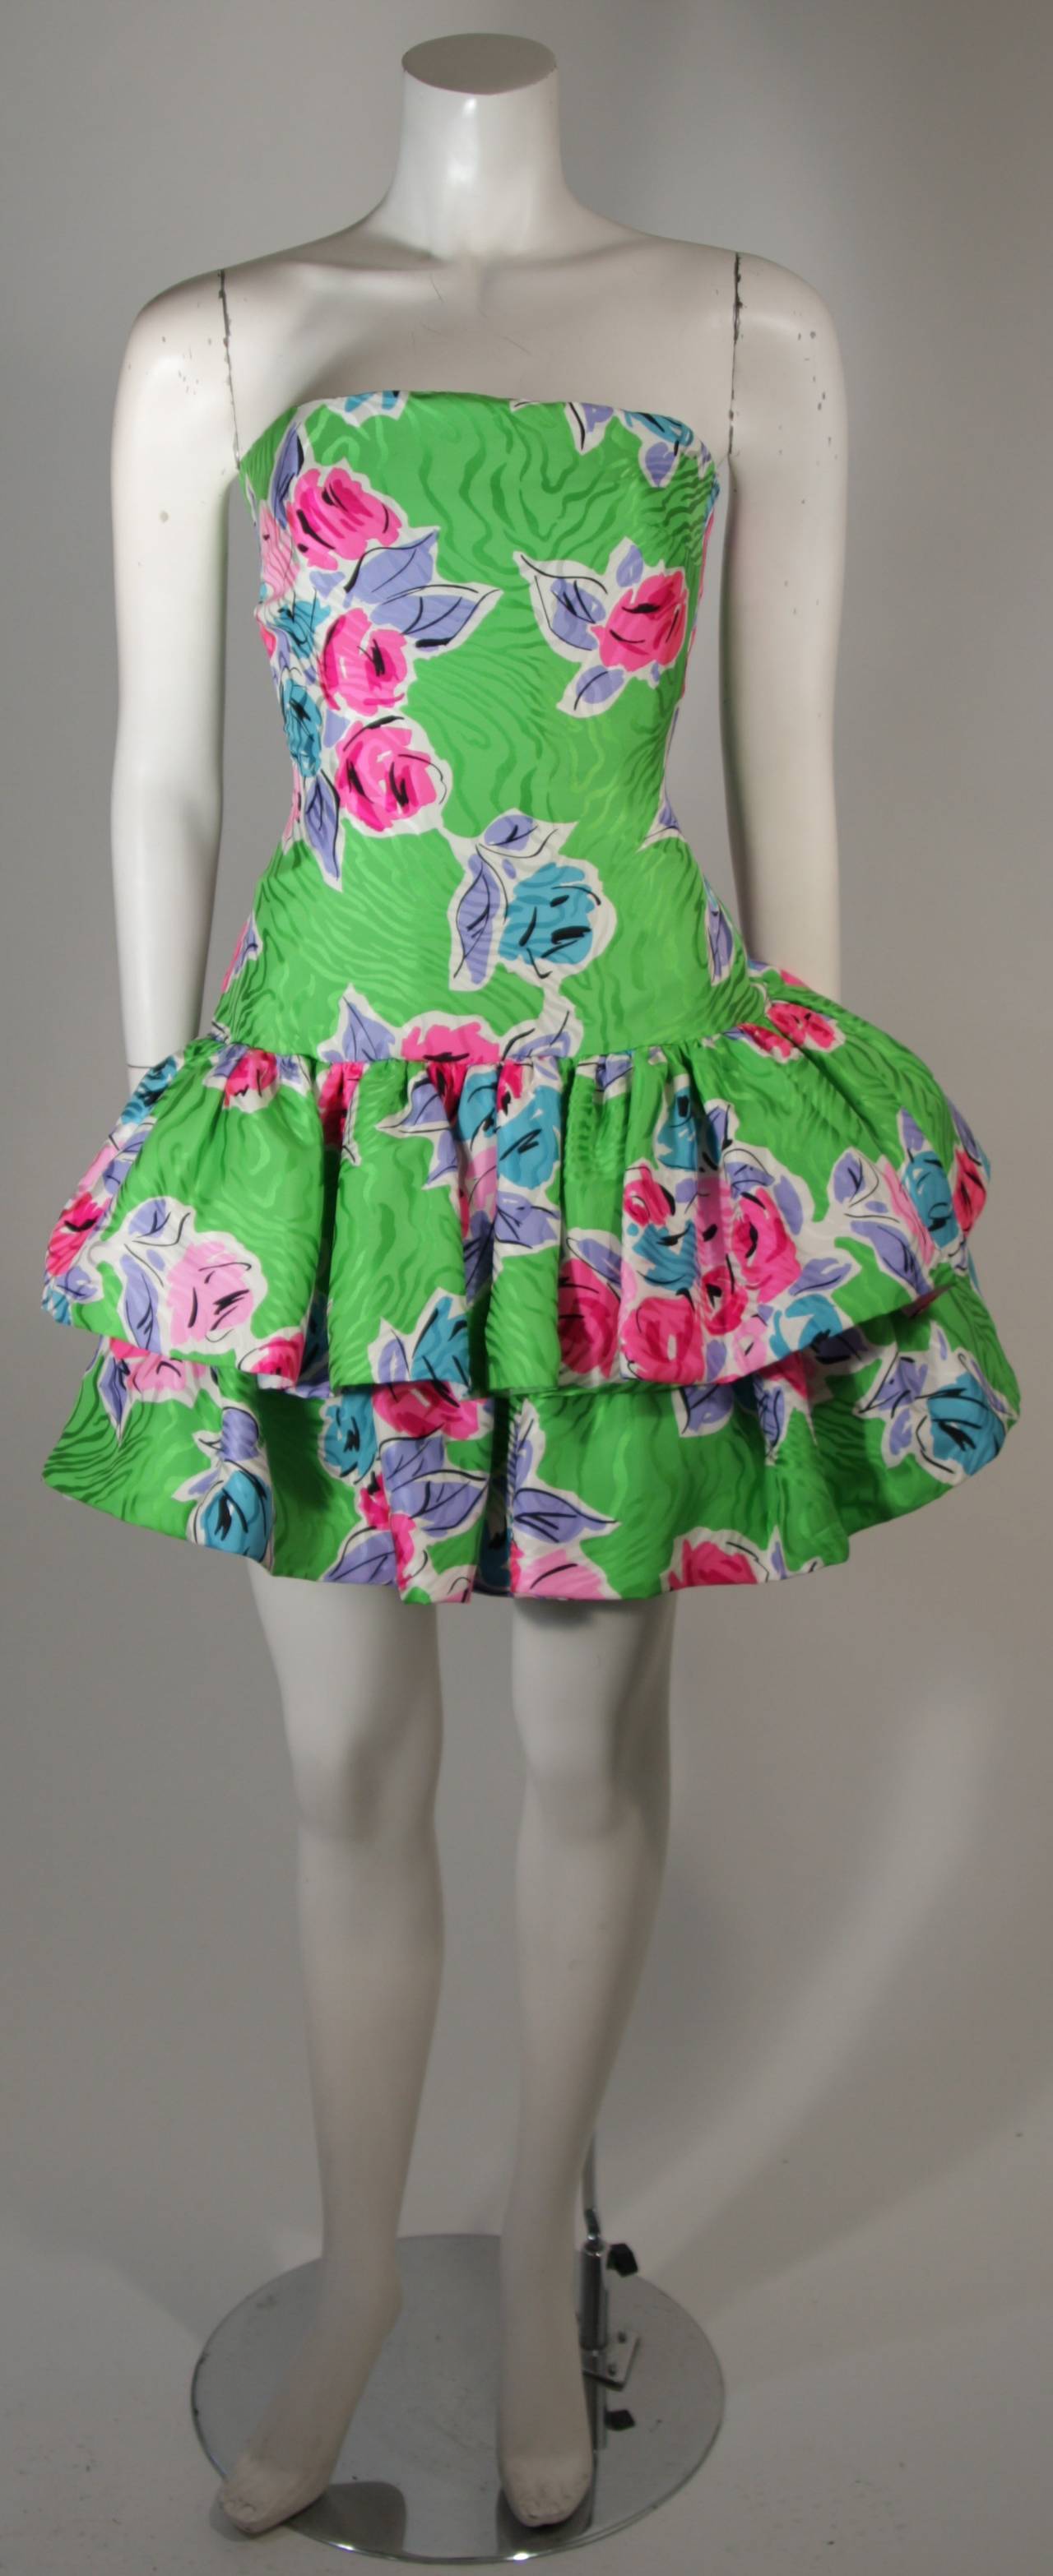 This Scaasi ensemble is composed of a textured silk in green with a floral pattern/design. The dress features a zipper closure. This has a lot of volume, a wonderful design. Made in U.S.A. 

**Please cross-reference measurements for personal